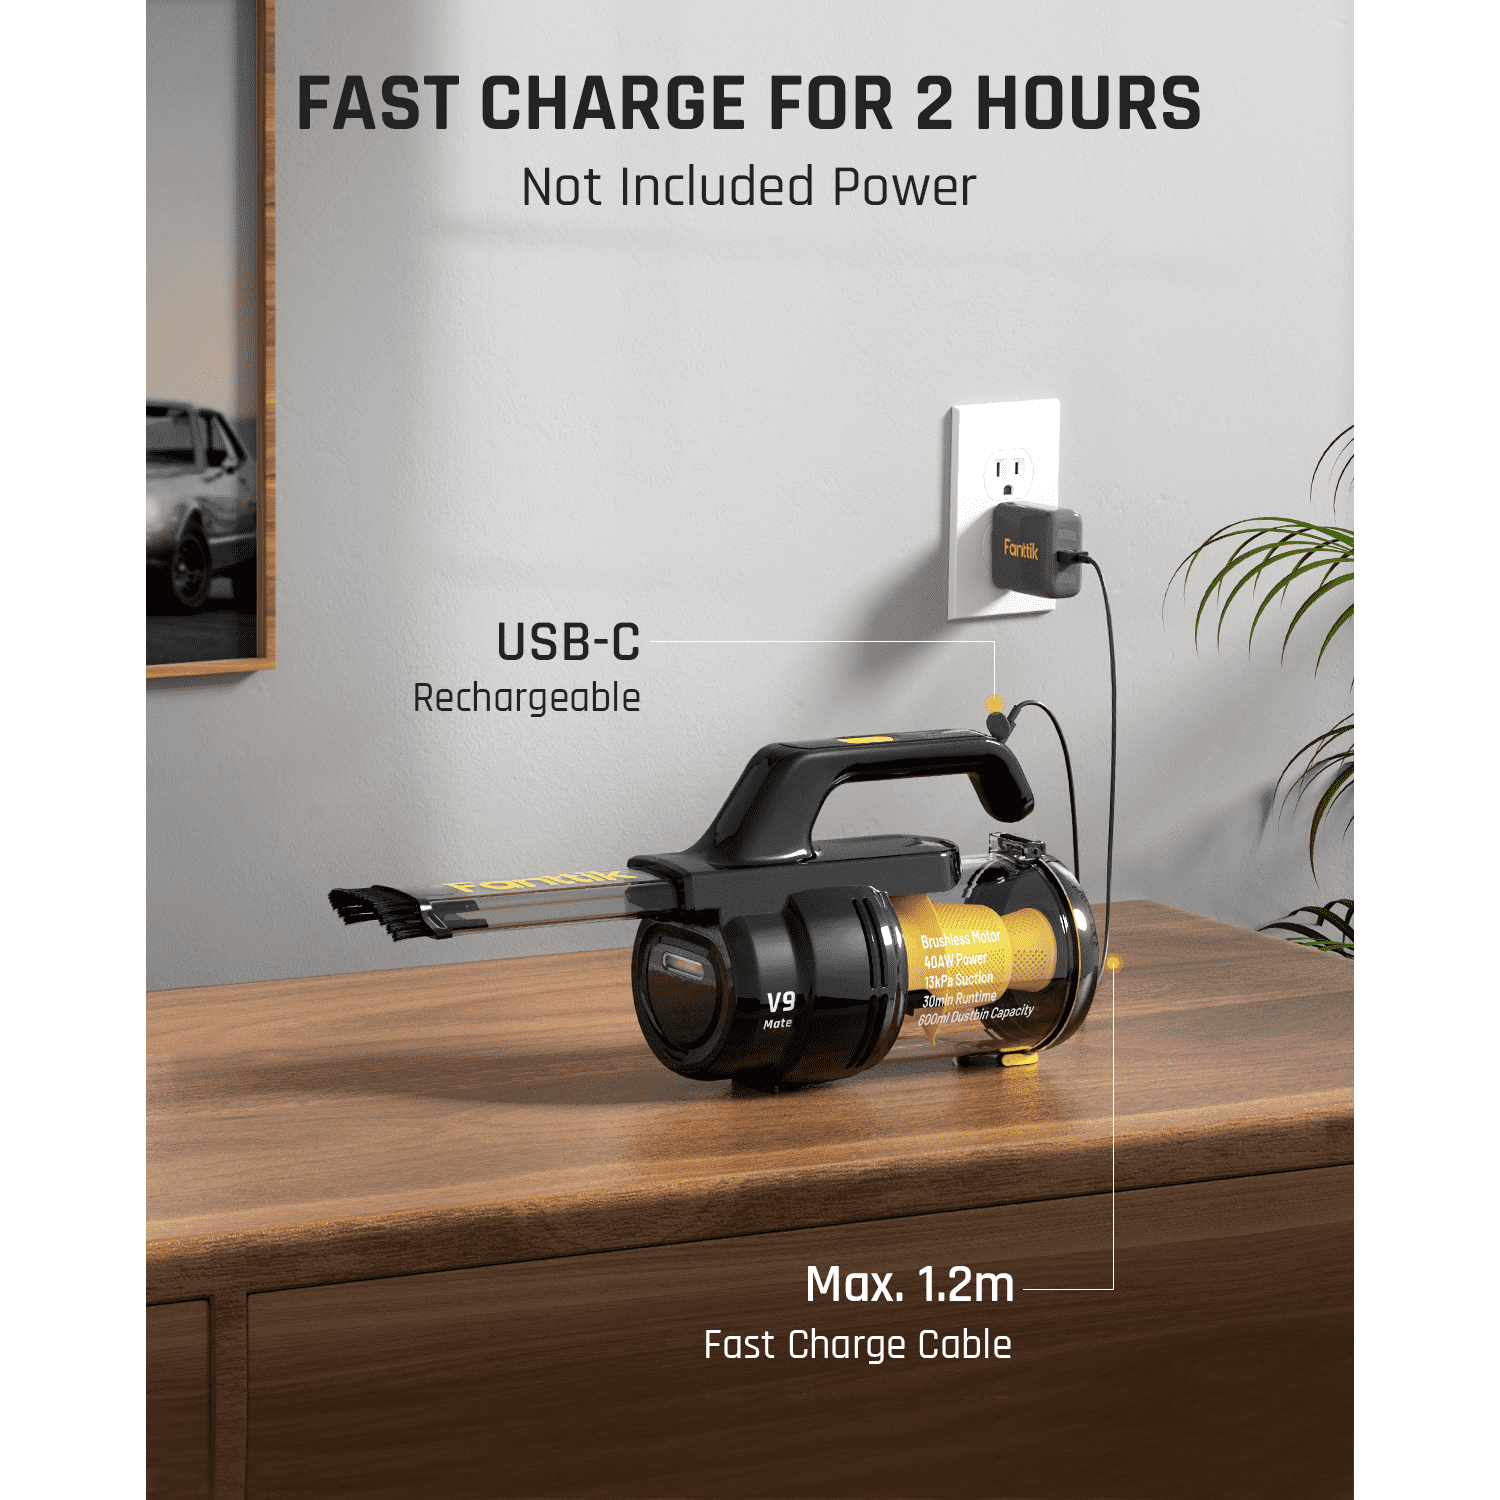 Fanttik V9 Mate Cordless Car Vacuum Intelligent fast charging design with the provided USB TYPE-C charging cable provides DC 5V 3A/ 9V 2A for full charging in 2 hours. 